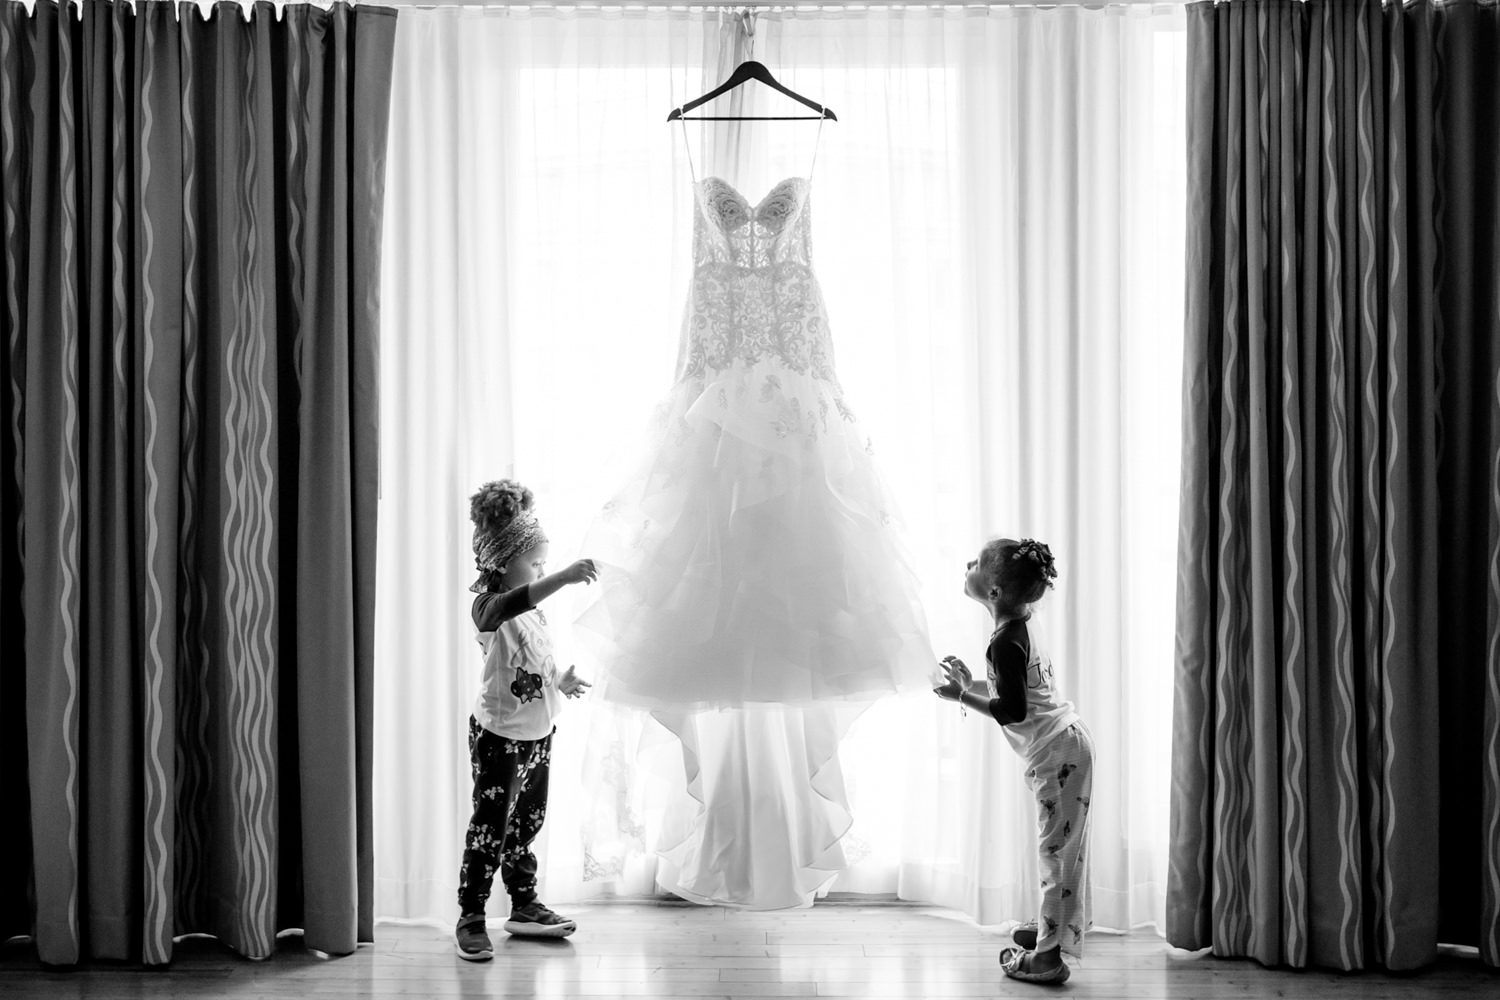 These two adorable little girls are inspecting the wedding gown that is hung on the window, They stare in awe at the beauty of the dress, This is a black and white photo, Catching the moment, Procopio Photography, best top Washington DC photographer, best top Maryland photographer, best top Virginia photographer, best top DMV photographer, best top wedding photographer, best top commercial photographer, best top portrait photographer, best top boudoir photographer, modern fine art portraits, dramatic, unique, different, bold, editorial, photojournalism, award winning photographer, published photographer, memorable images, be different, stand out